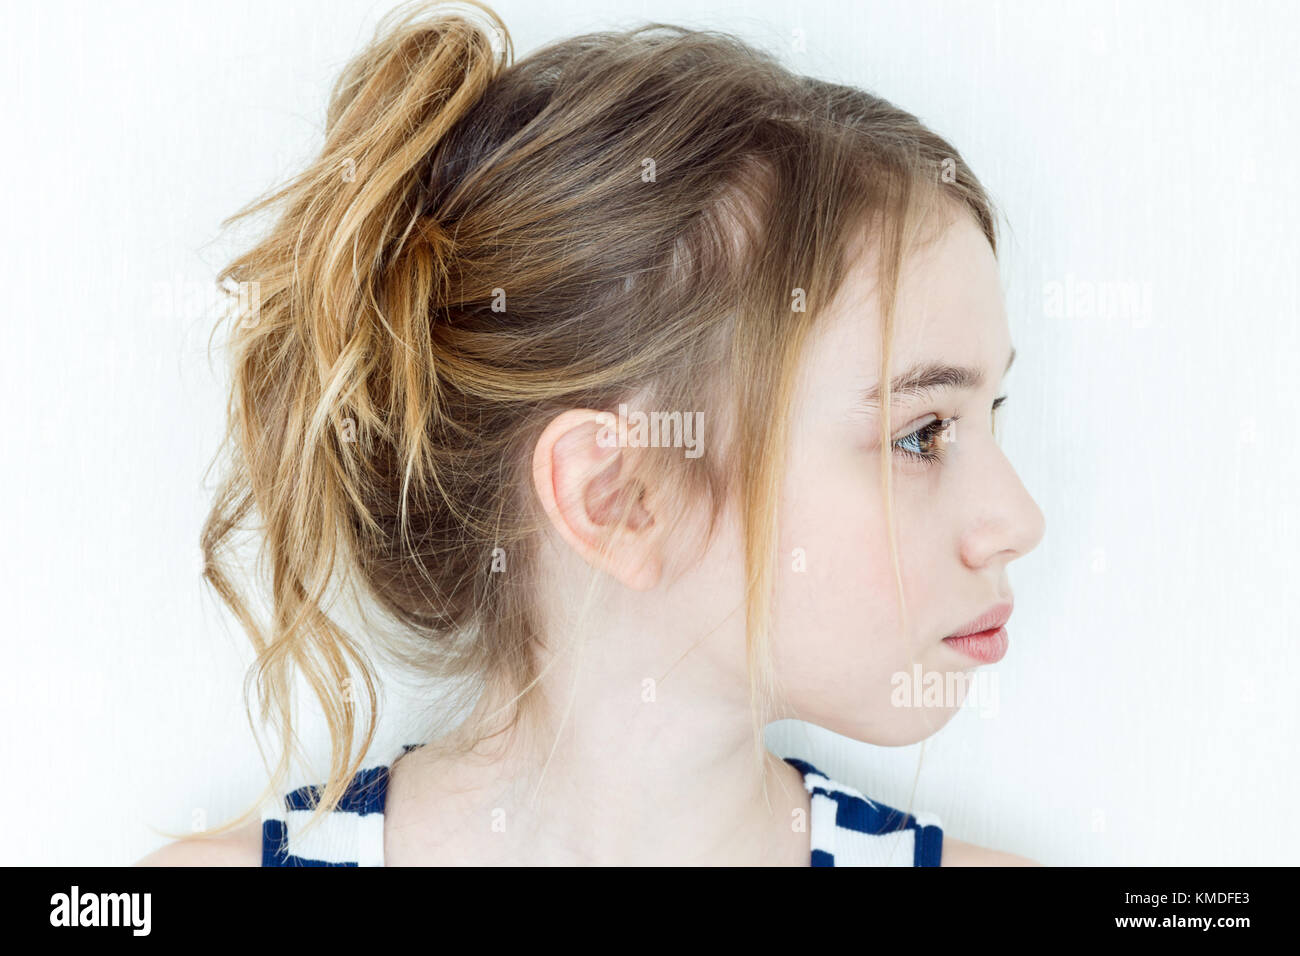 Cute girl eleven years old with blond long hair on white wall background in profile Stock Photo